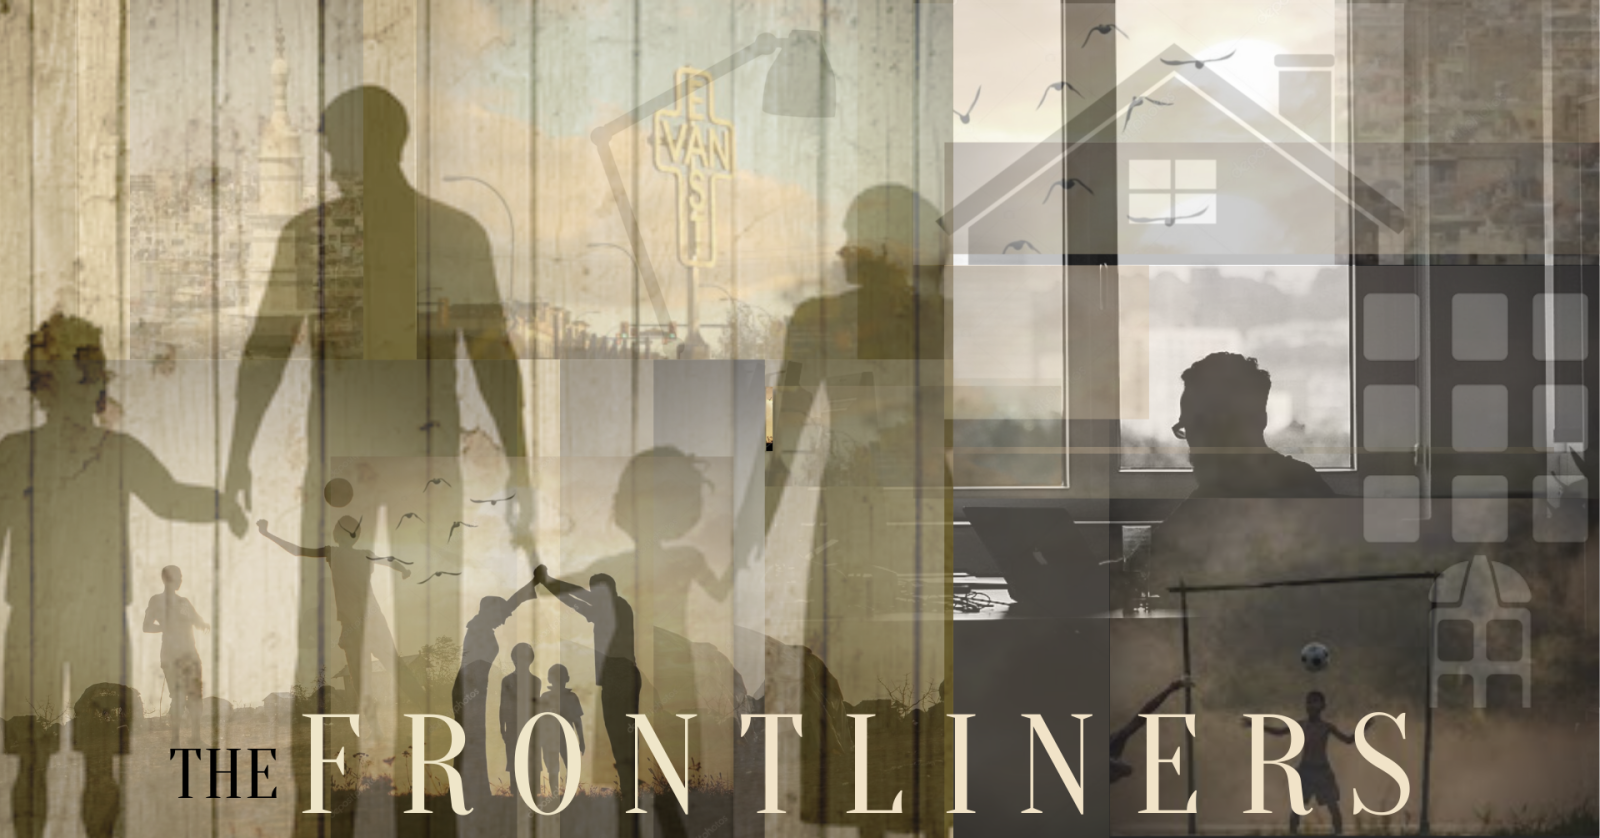 A promotional image for The Frontliners workshop production.